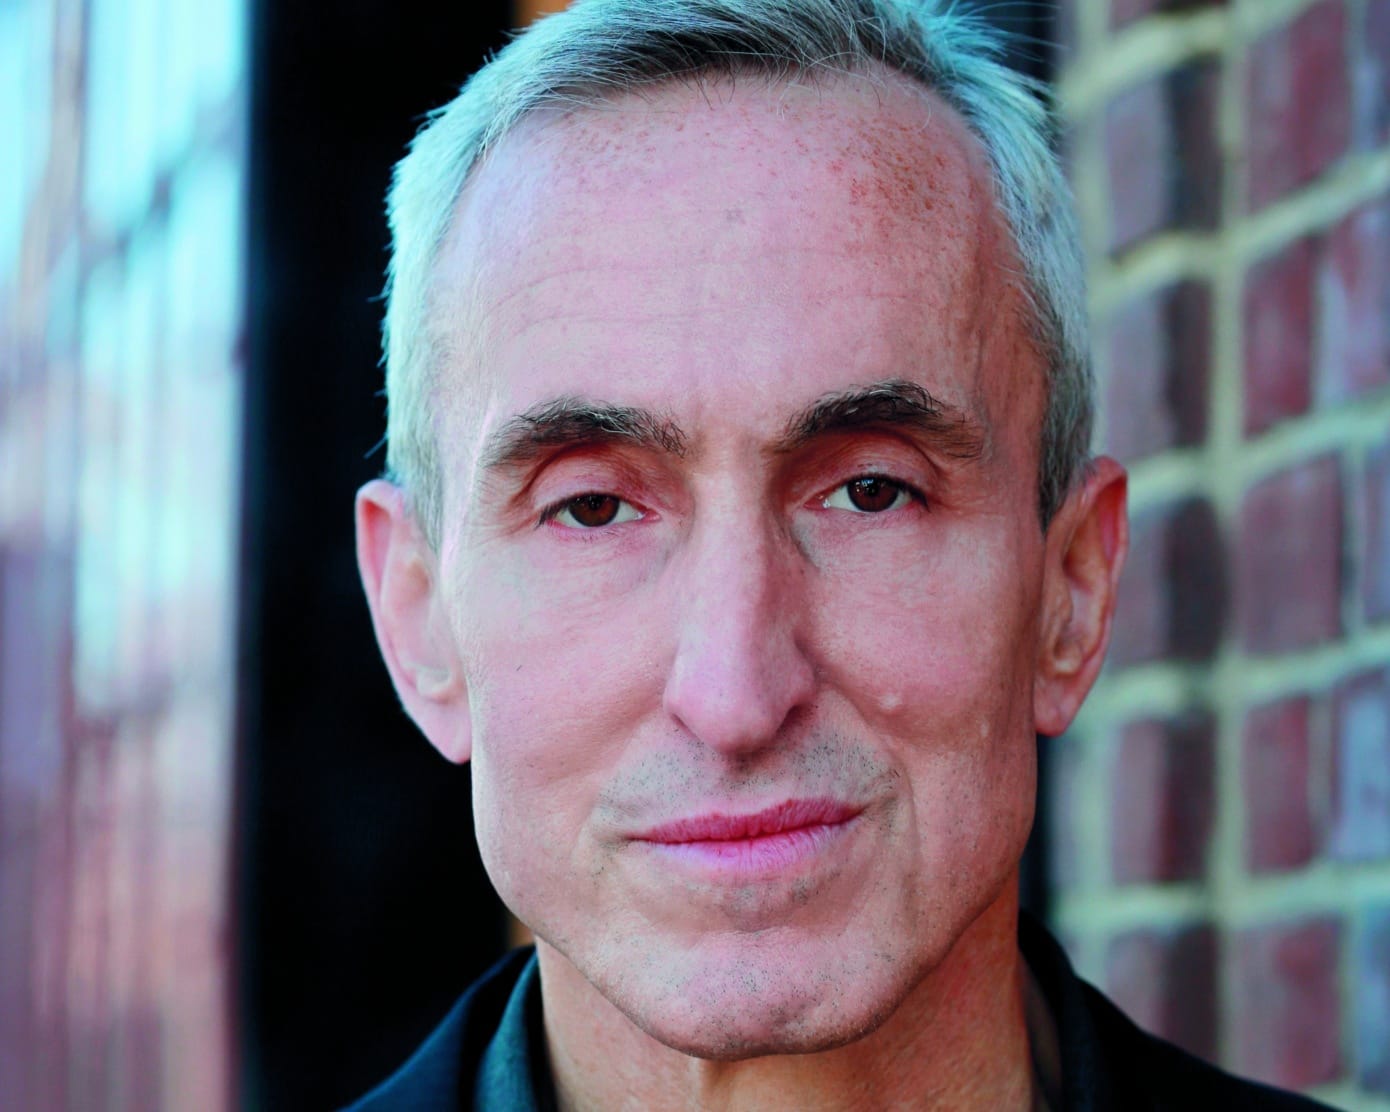 Bad Science and Diet Lies Keep Feeding Obesity: Gary Taubes with Dave Asprey – #778